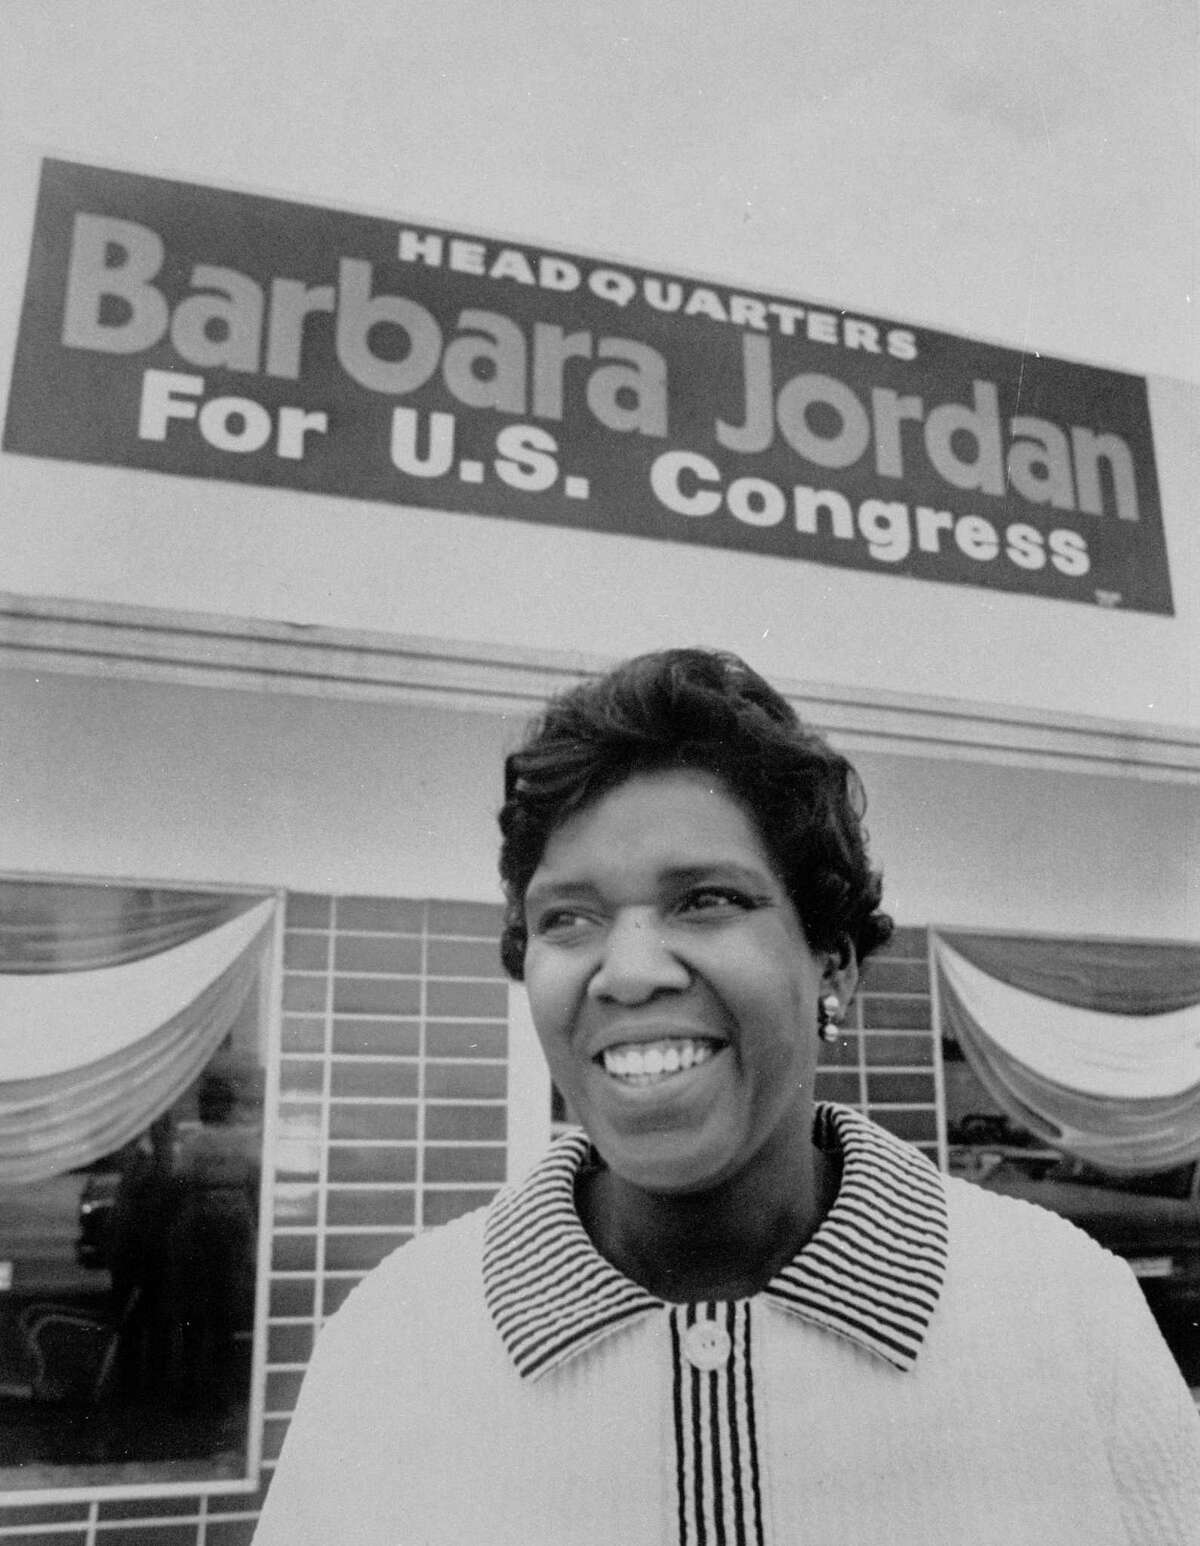 A champion for all Barbara Jordan (1936–1996) was the first African American woman elected to Congress, and one of the first African Americans to be elected since 1898. A native Houstonian, Jordan earned her undergraduate degree from Texas Southern University and her law degree from Boston University. After she worked on the John F. Kennedy presidential campaign, Jordan entered the race for the Texas House of Representatives, losing twice. In 1996, she ran for the Texas Senate and won, becoming the first African American state senator since 1883. 